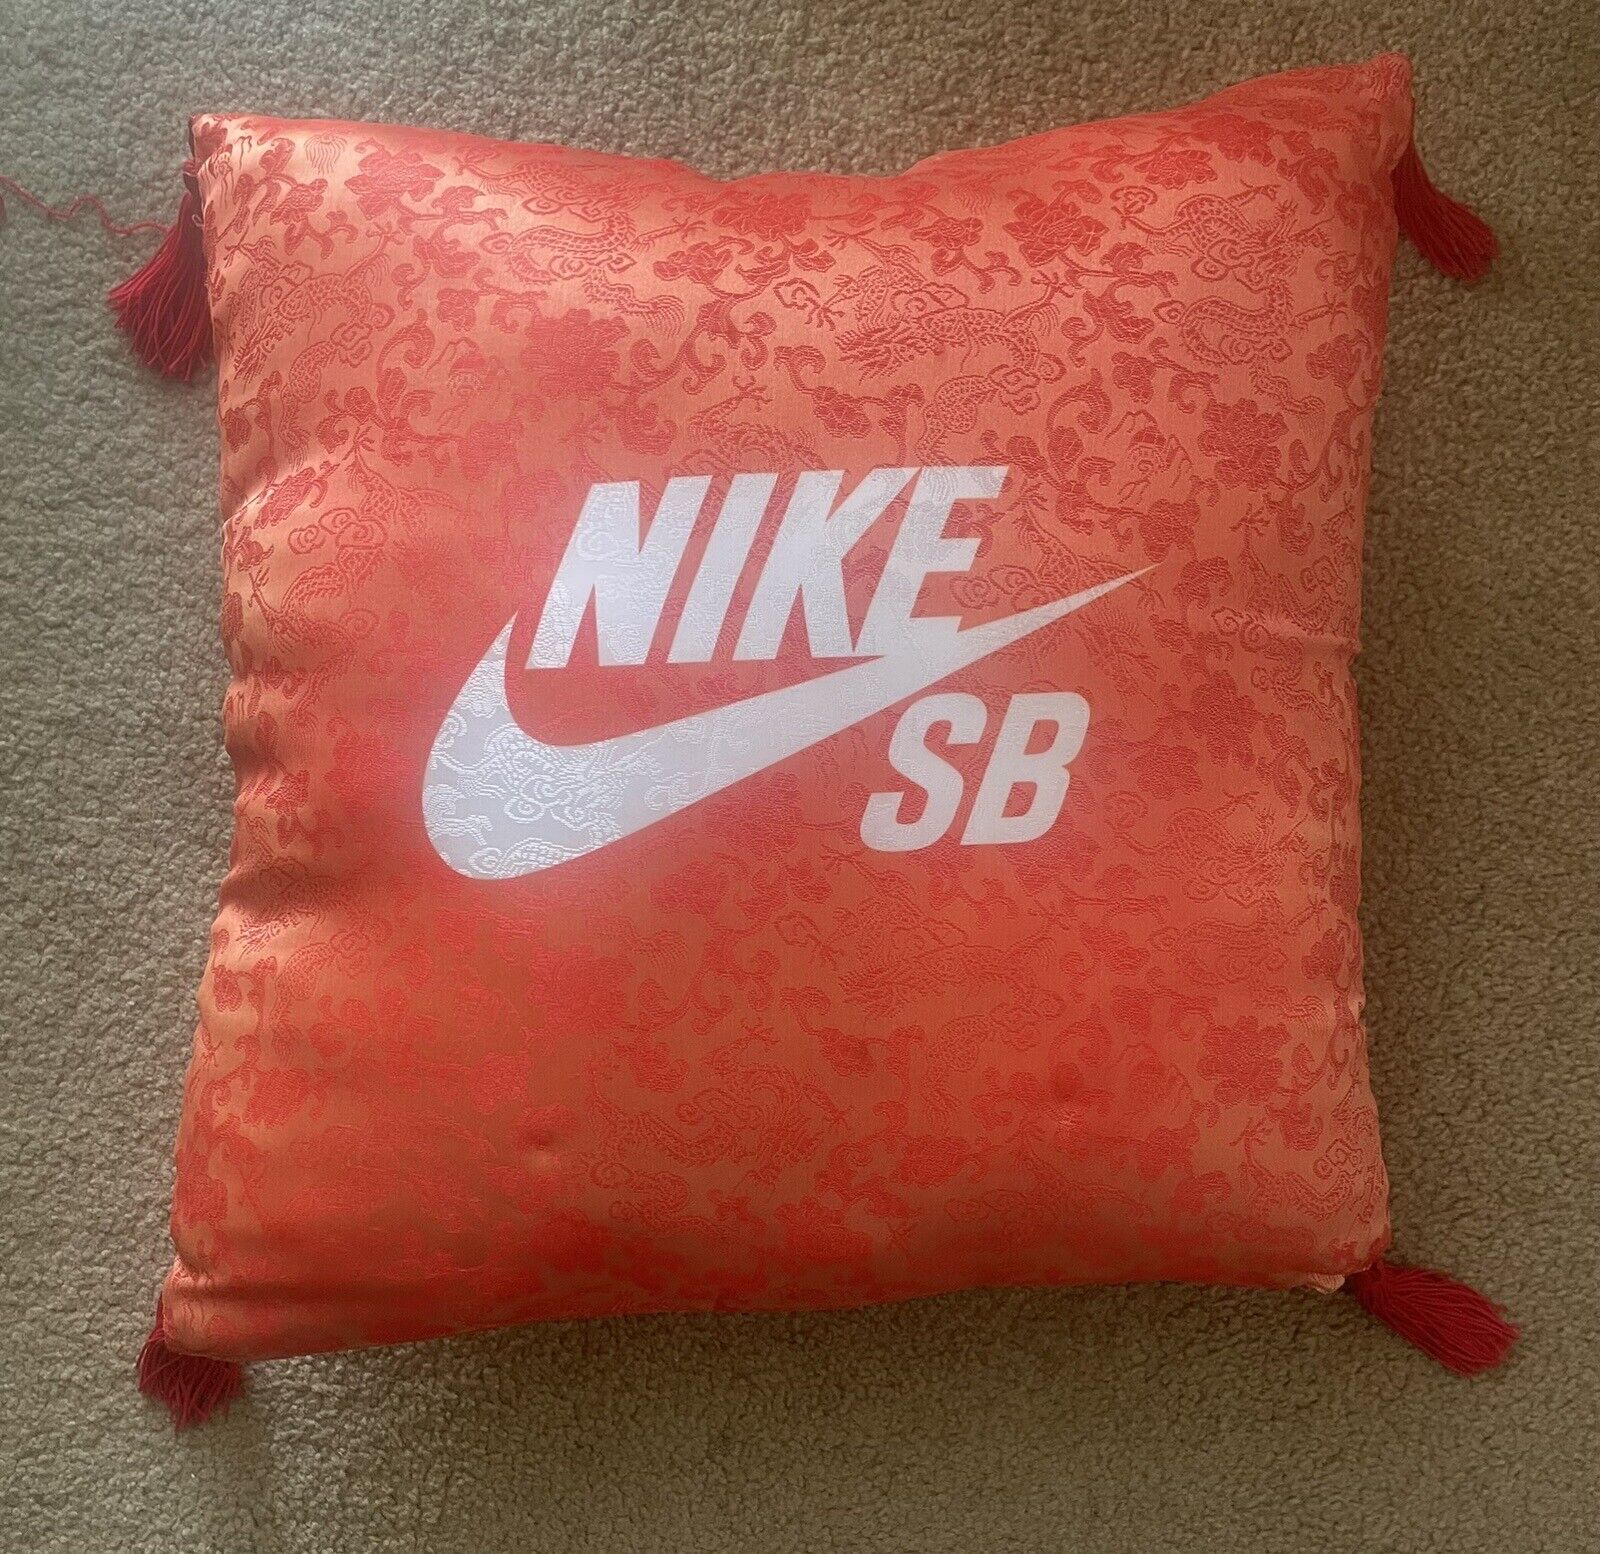 Rare Nike SB Store Display Pillow. Double Sided. Rare. Hypebeast Collector